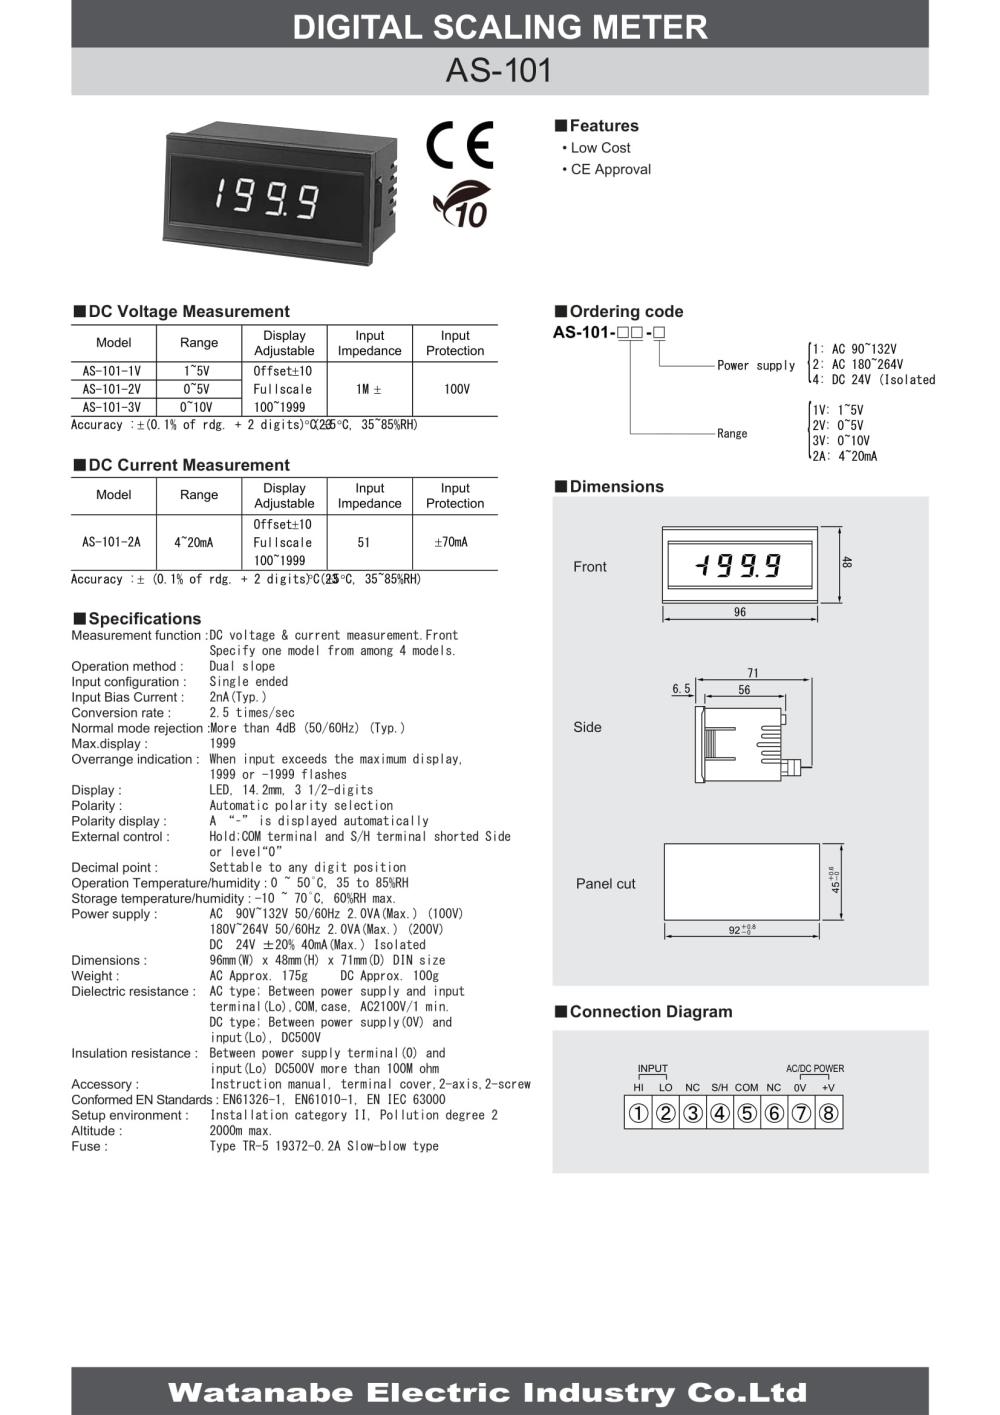 WATANABE Digital Scaling Meter AS-101 Series,AS-101-1V-1, AS-101-1V-2, AS-101-1V-4, AS-101-2V-1, AS-101-2V-2, AS-101-2V-4, AS-101-3V-1, AS-101-3V-2, AS-101-3V-4, AS-101-2A-1, AS-101-2A-2, AS-101-2A-4, WATANABE, ASAHI KEIKI, Digital Scaling Meter,WATANABE,Instruments and Controls/Meters